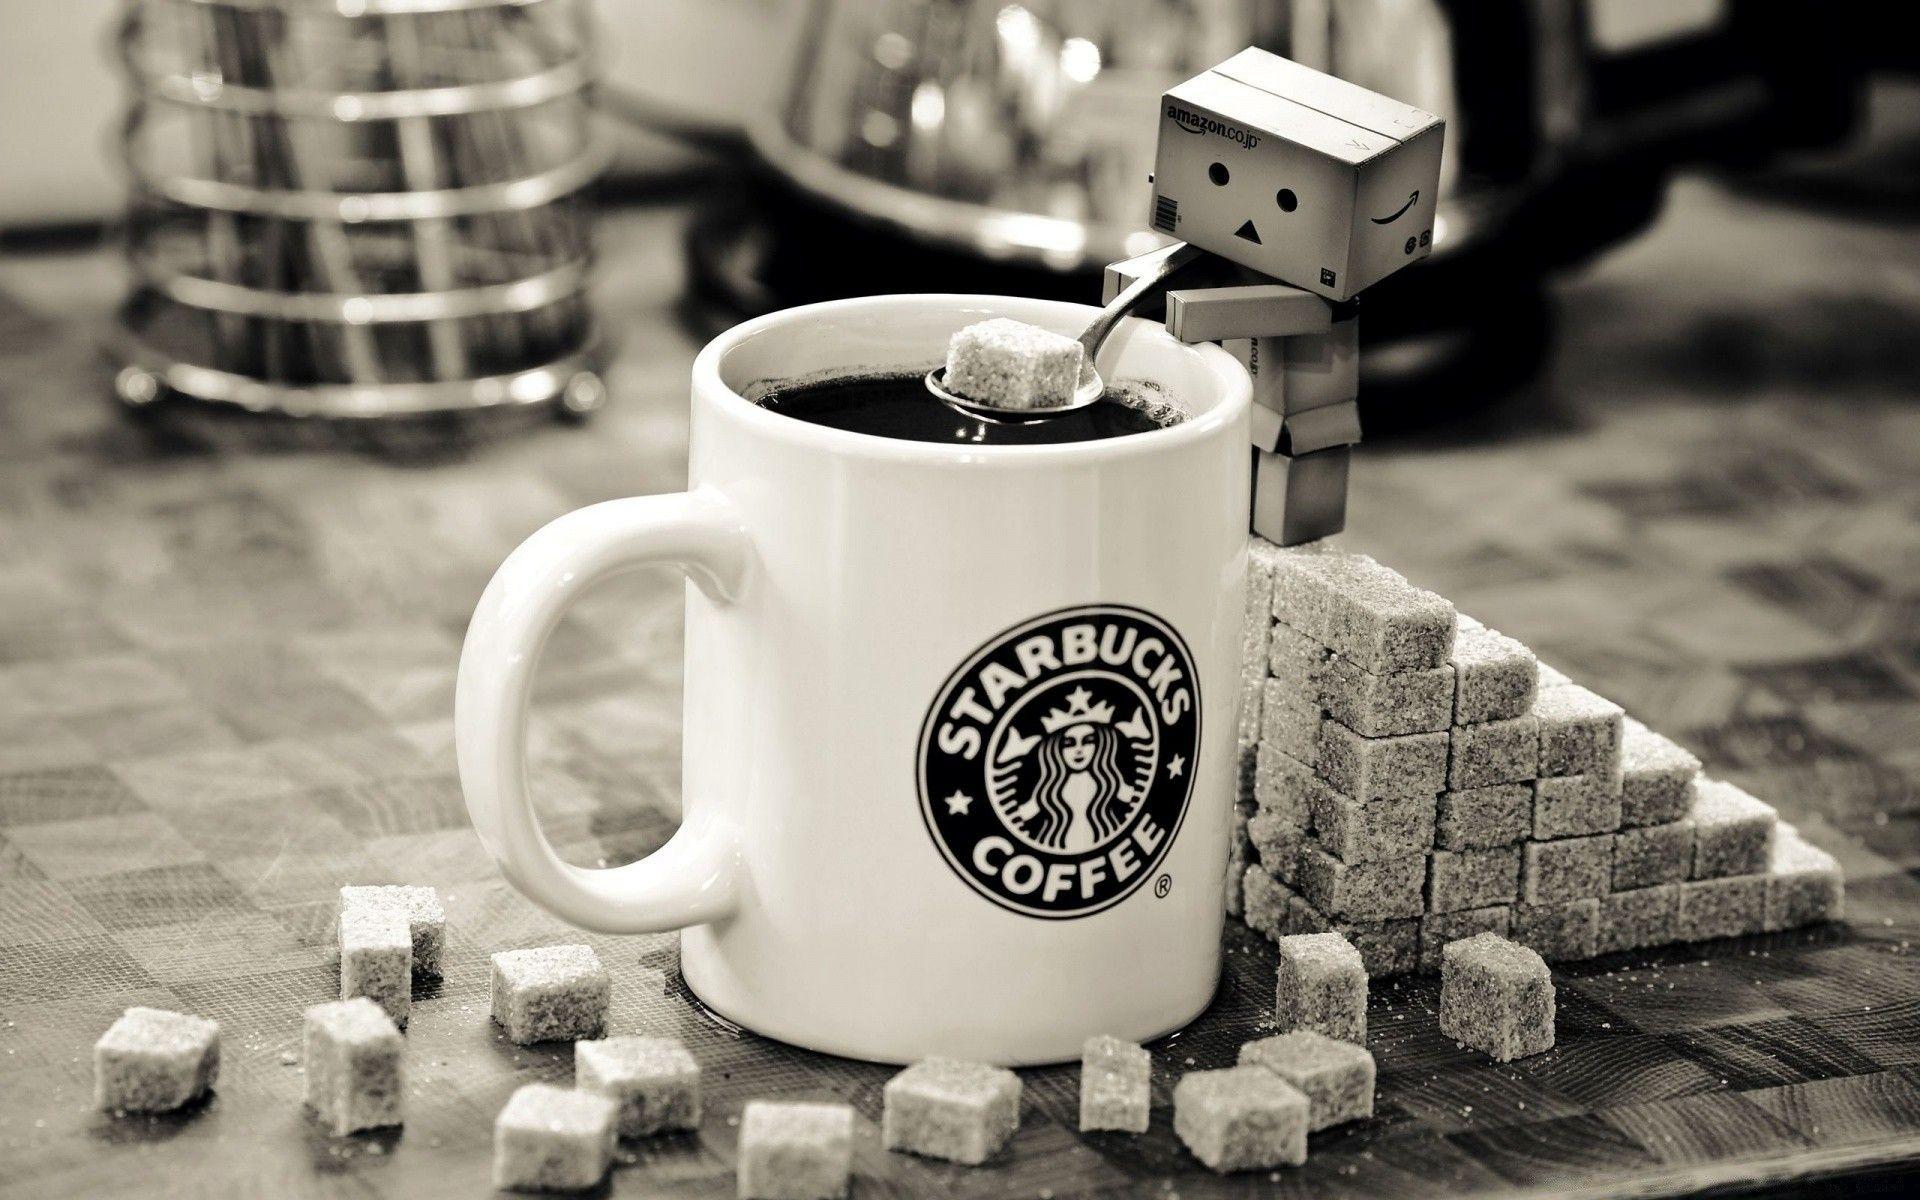 Danbo Starbucks Coffee. Android wallpaper for free